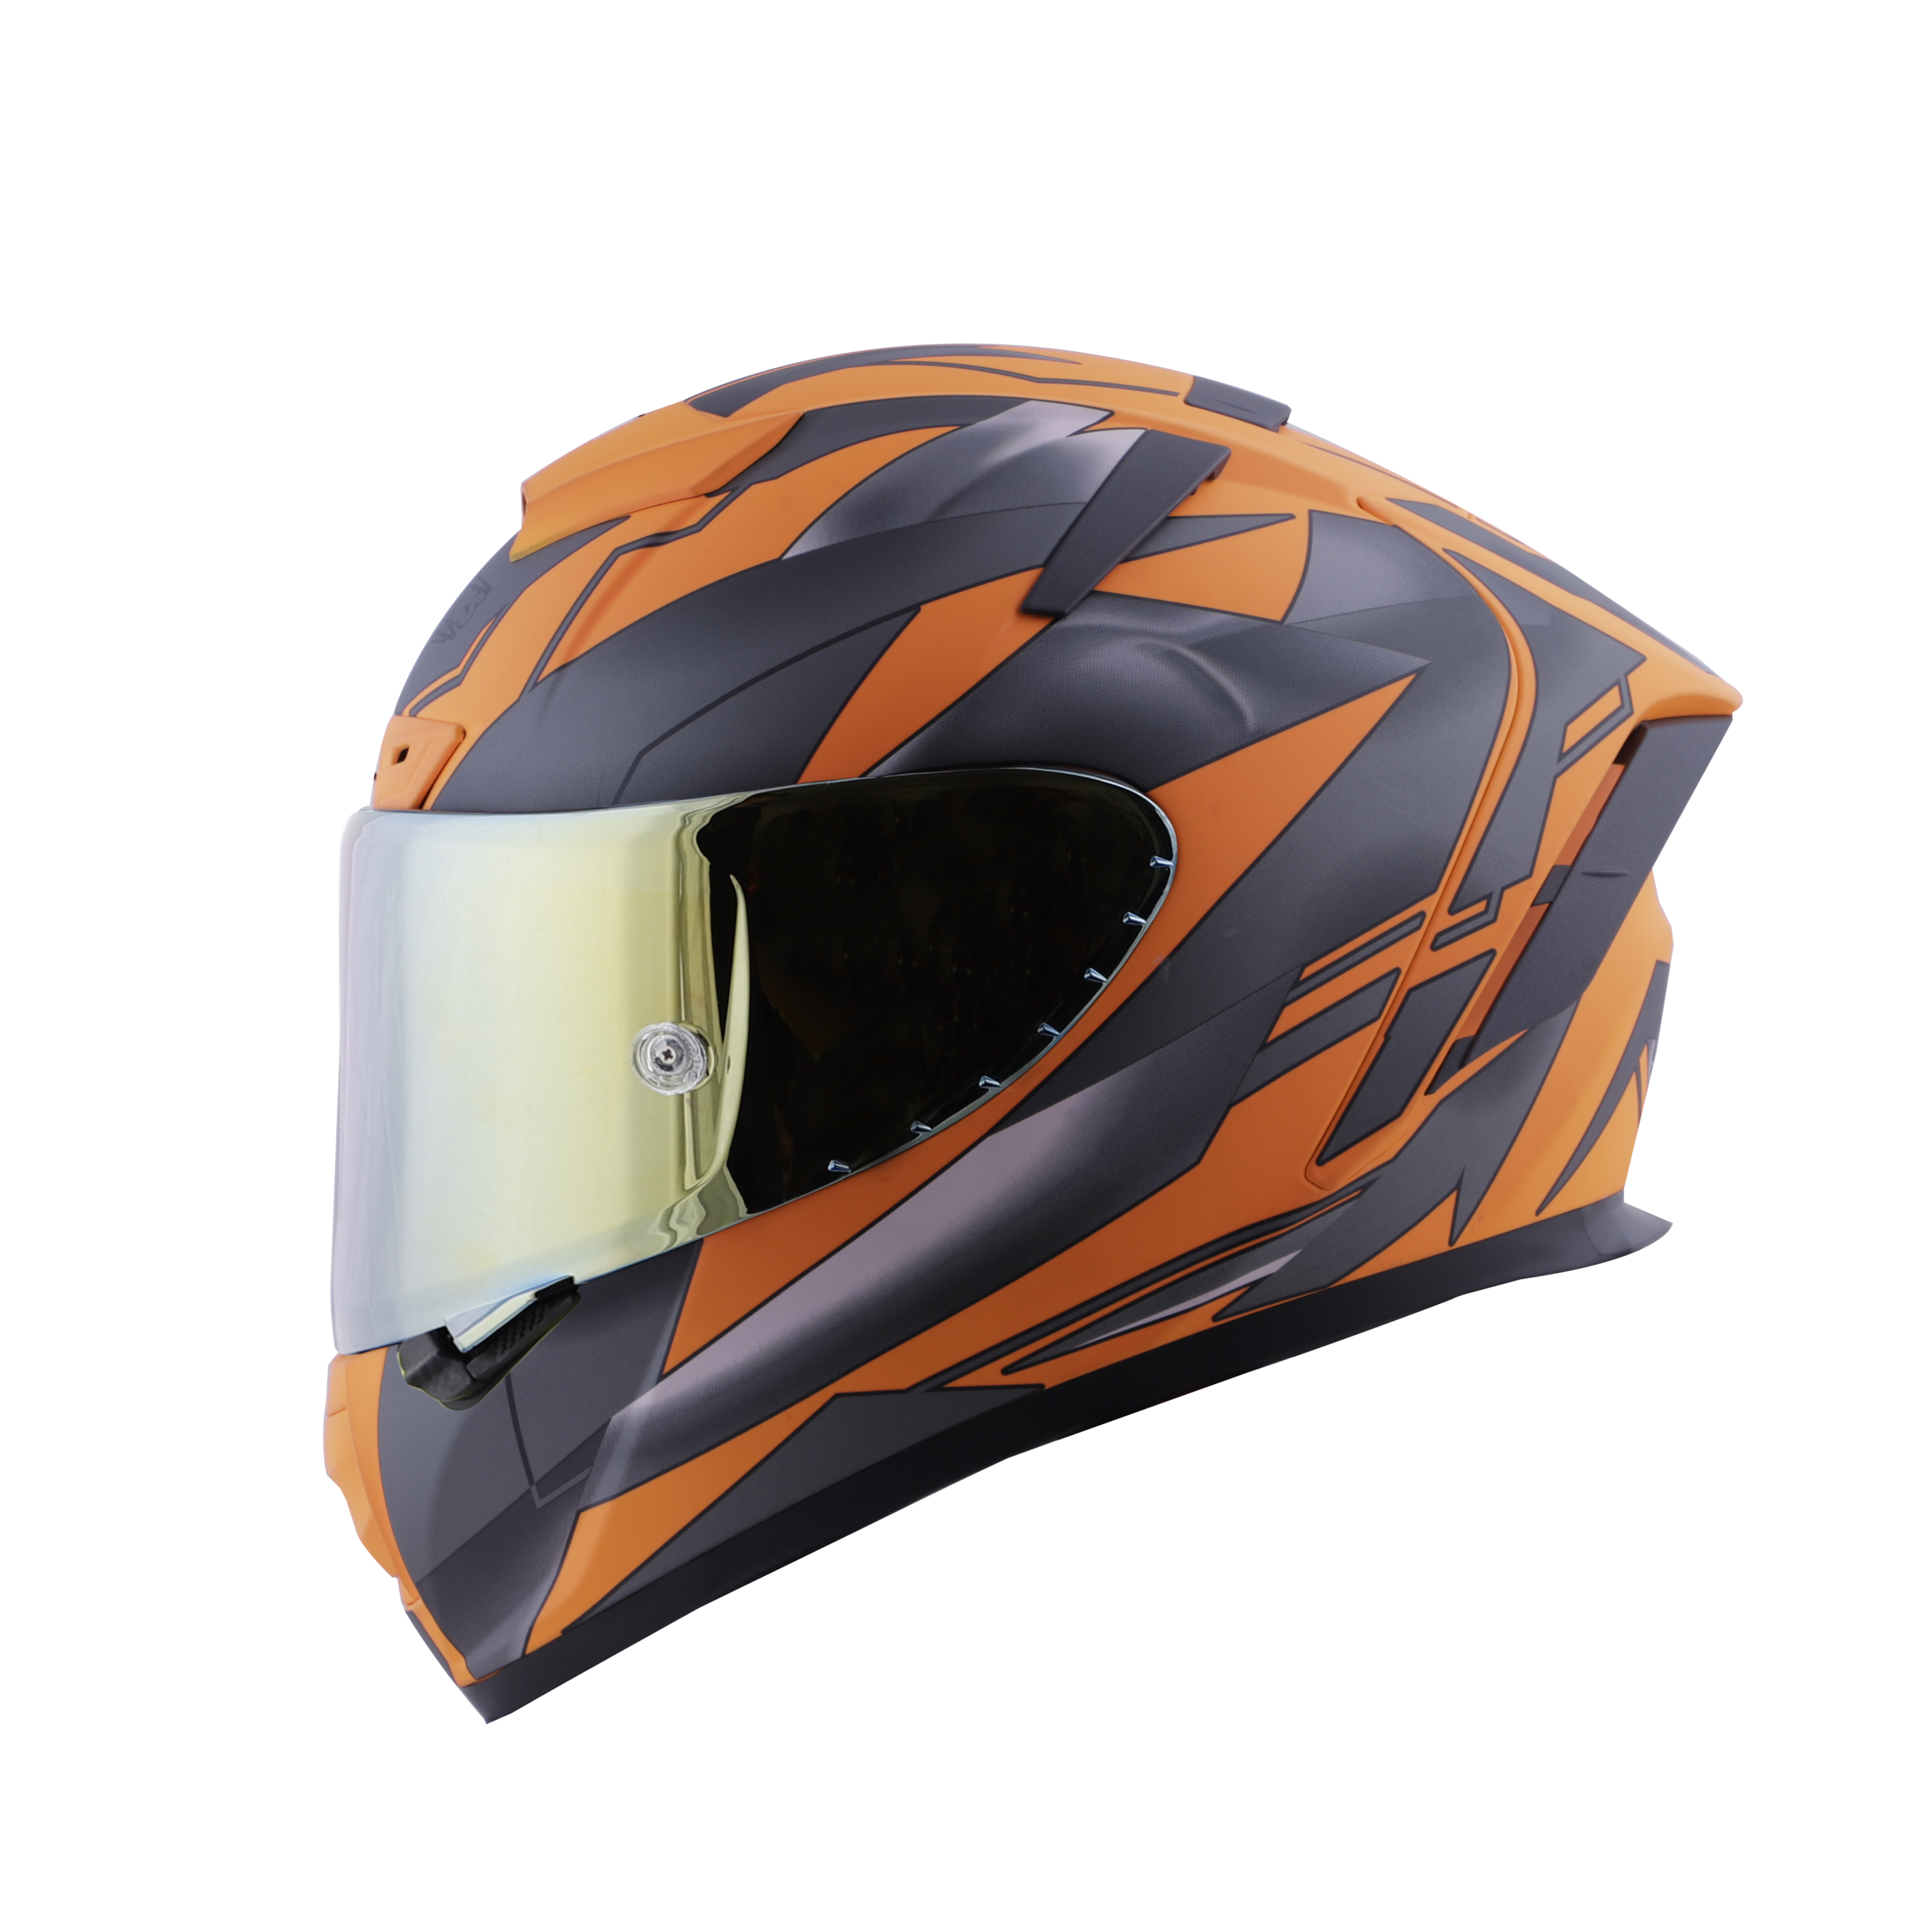 SA-2 METALLIC GLOSSY FLUO ORANGE WITH GREY ( FITTED WITH CLEAR VISOR  EXTRA CHROME GOLD VISOR FREE) WITH ANTI-FOG SHIELD HOLDER